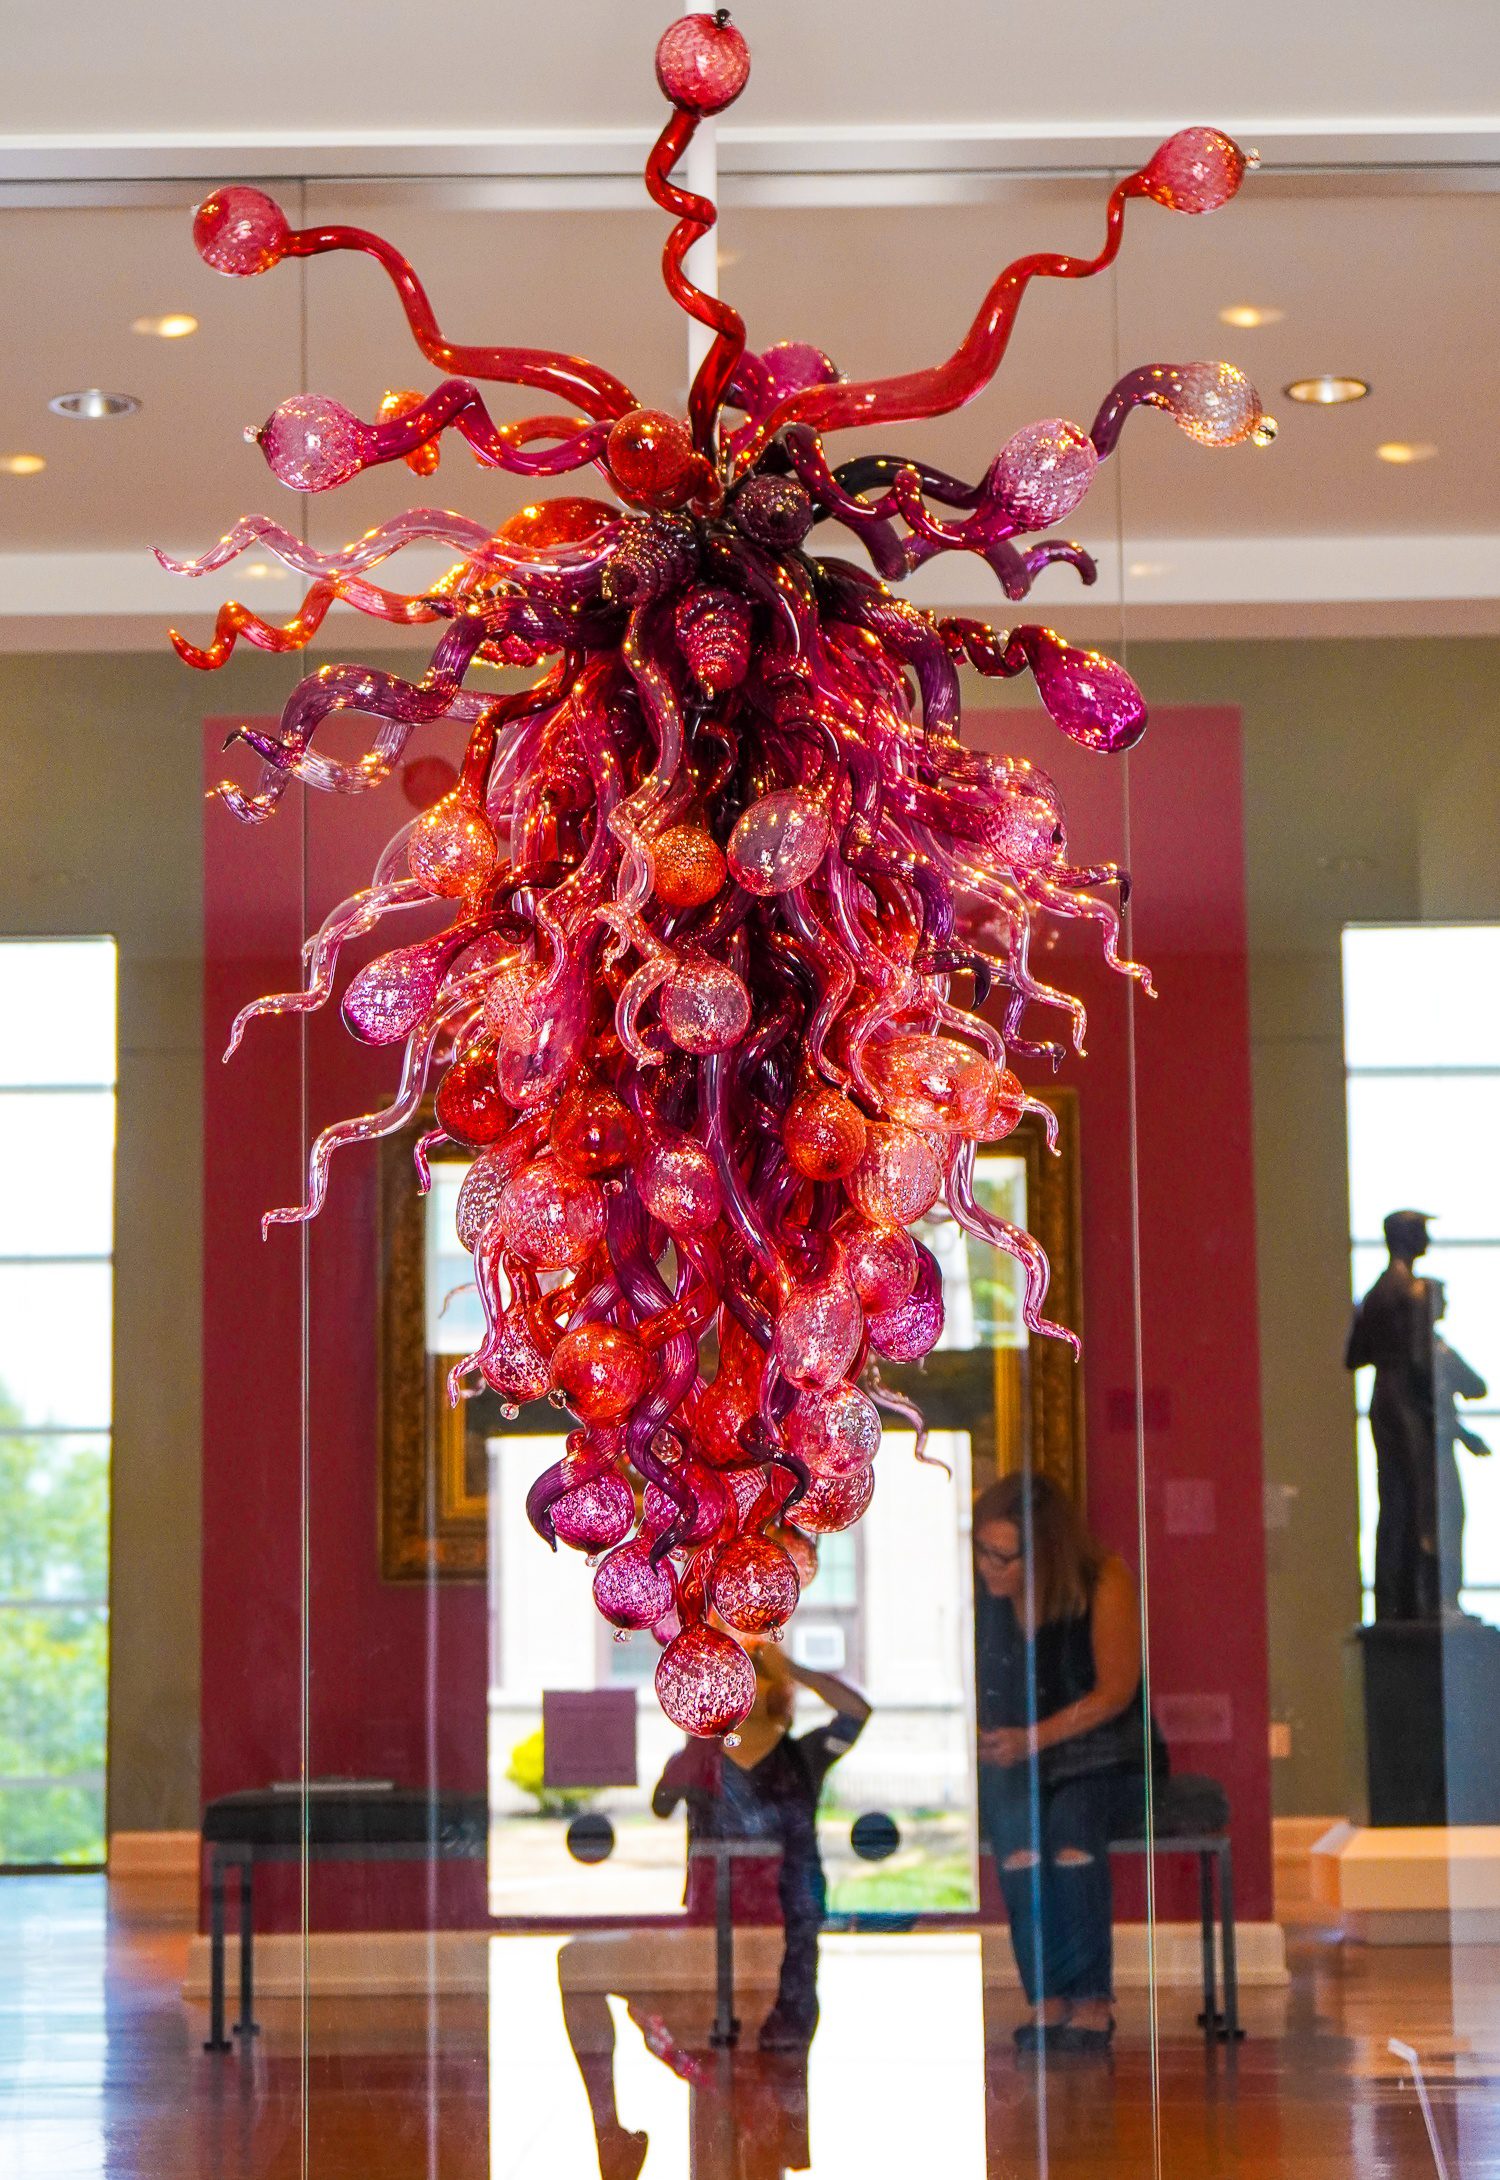 Chihuly chandelier sculpture in Greensburg, PA